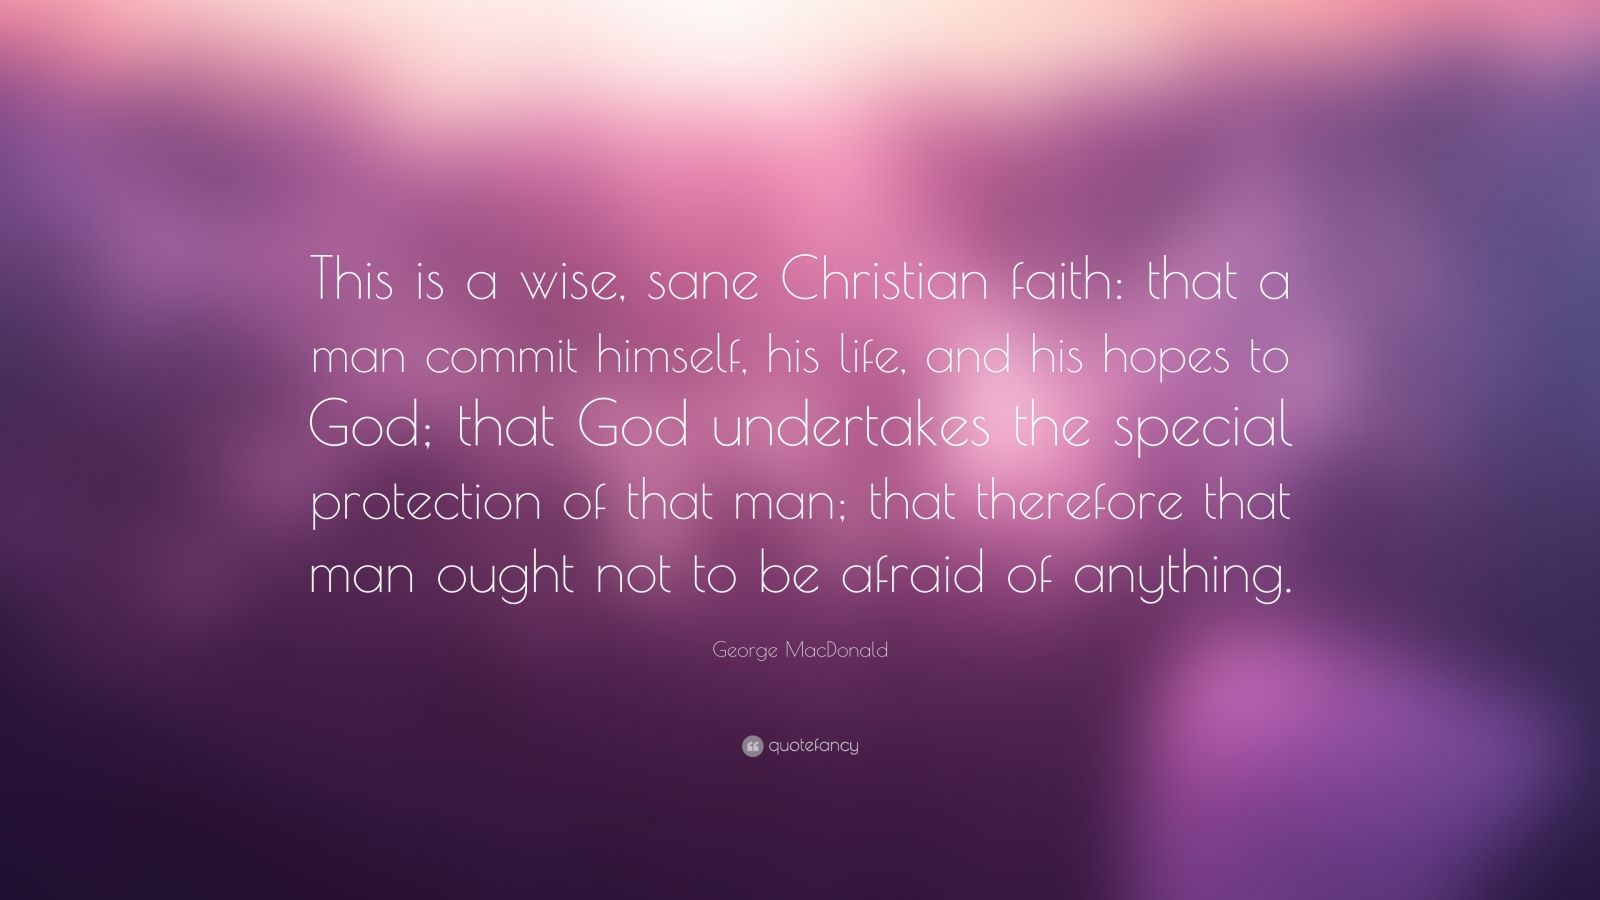 George MacDonald Quote: “This is a wise, sane Christian faith: that a ...